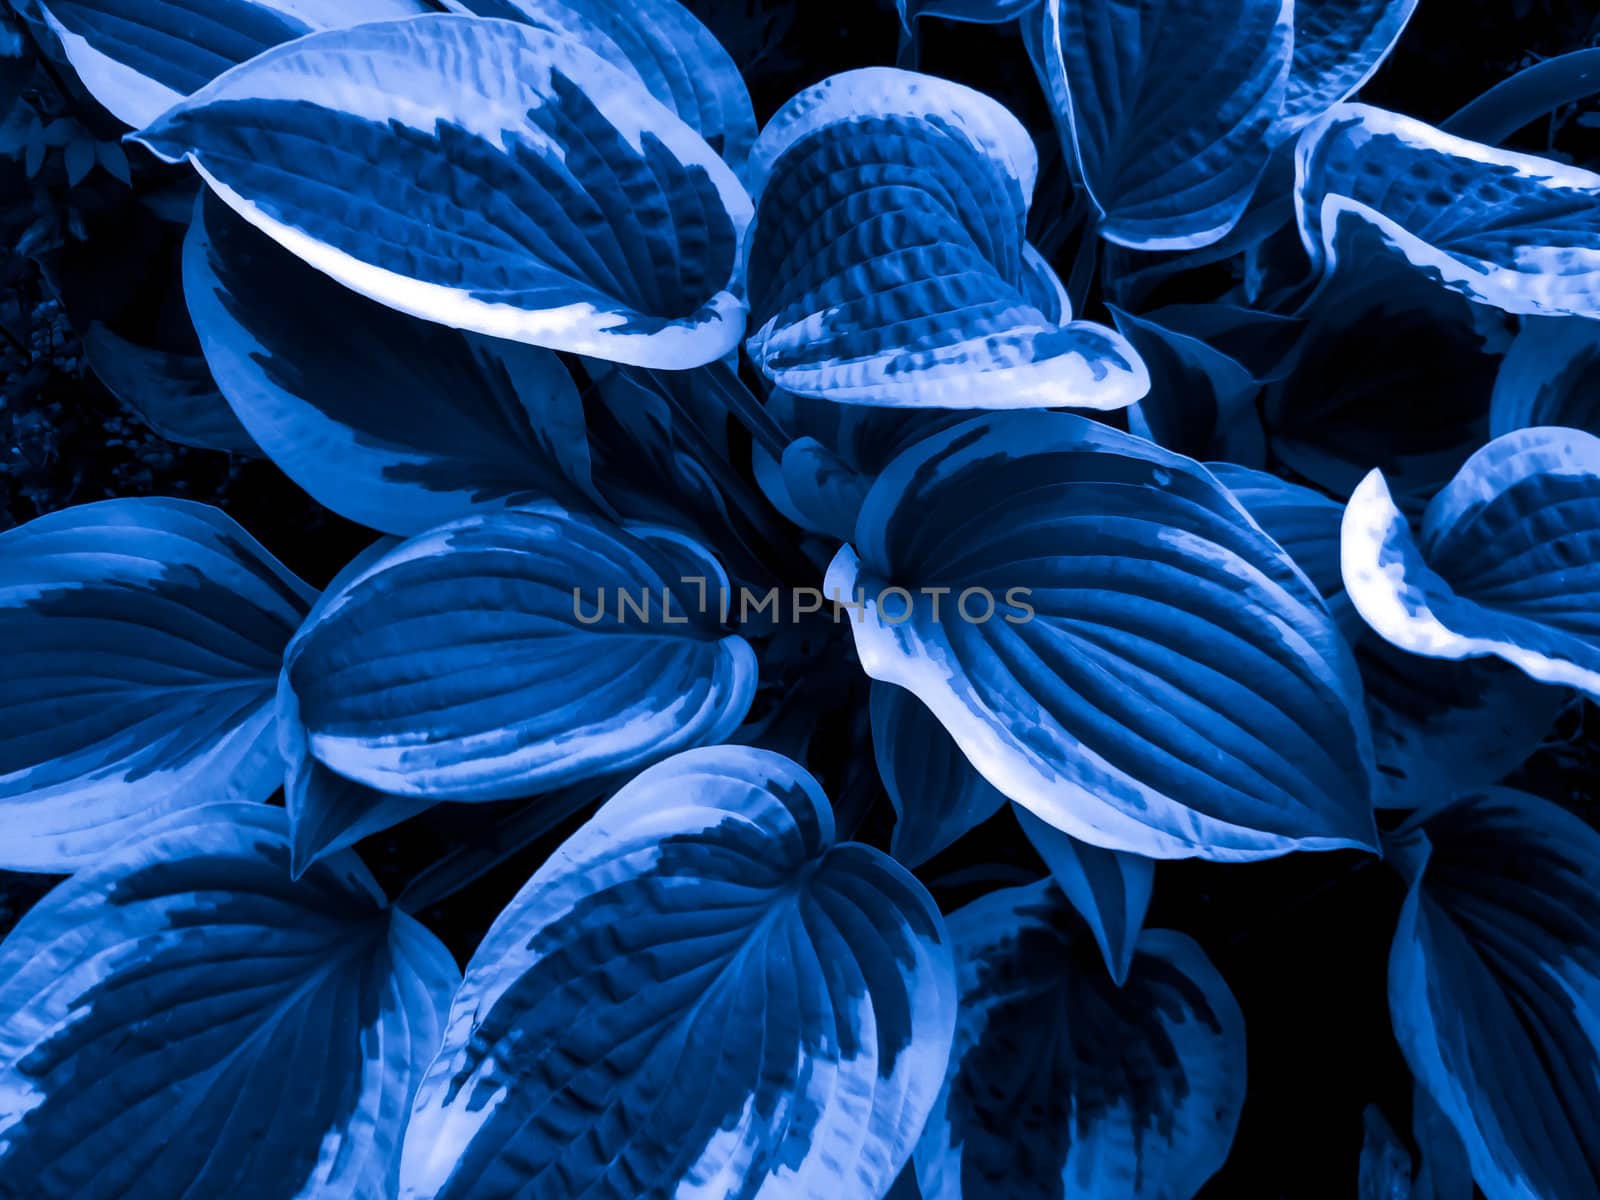 Texture of blue and white leaves of a decorative plant.